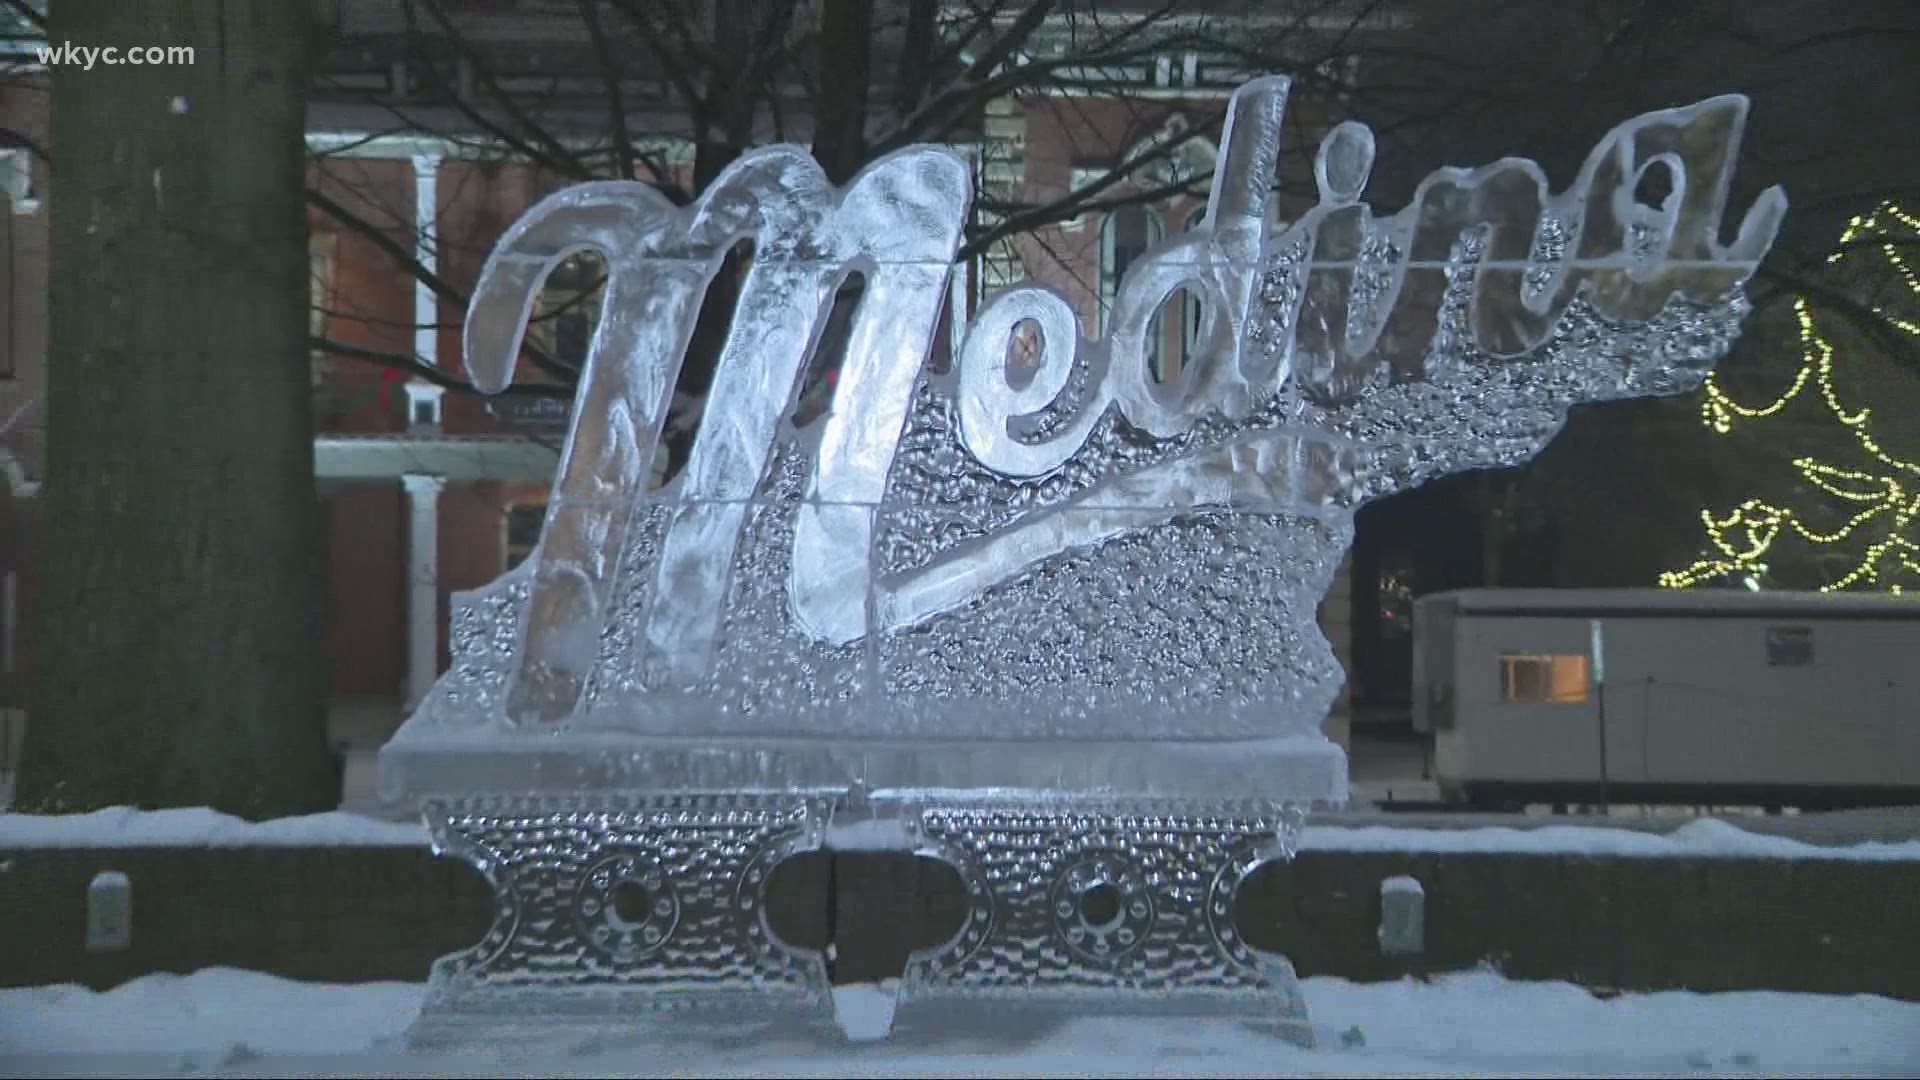 The Medina Ice fest is underway. In its 27th year, the festival will take place Feb. 19-22.